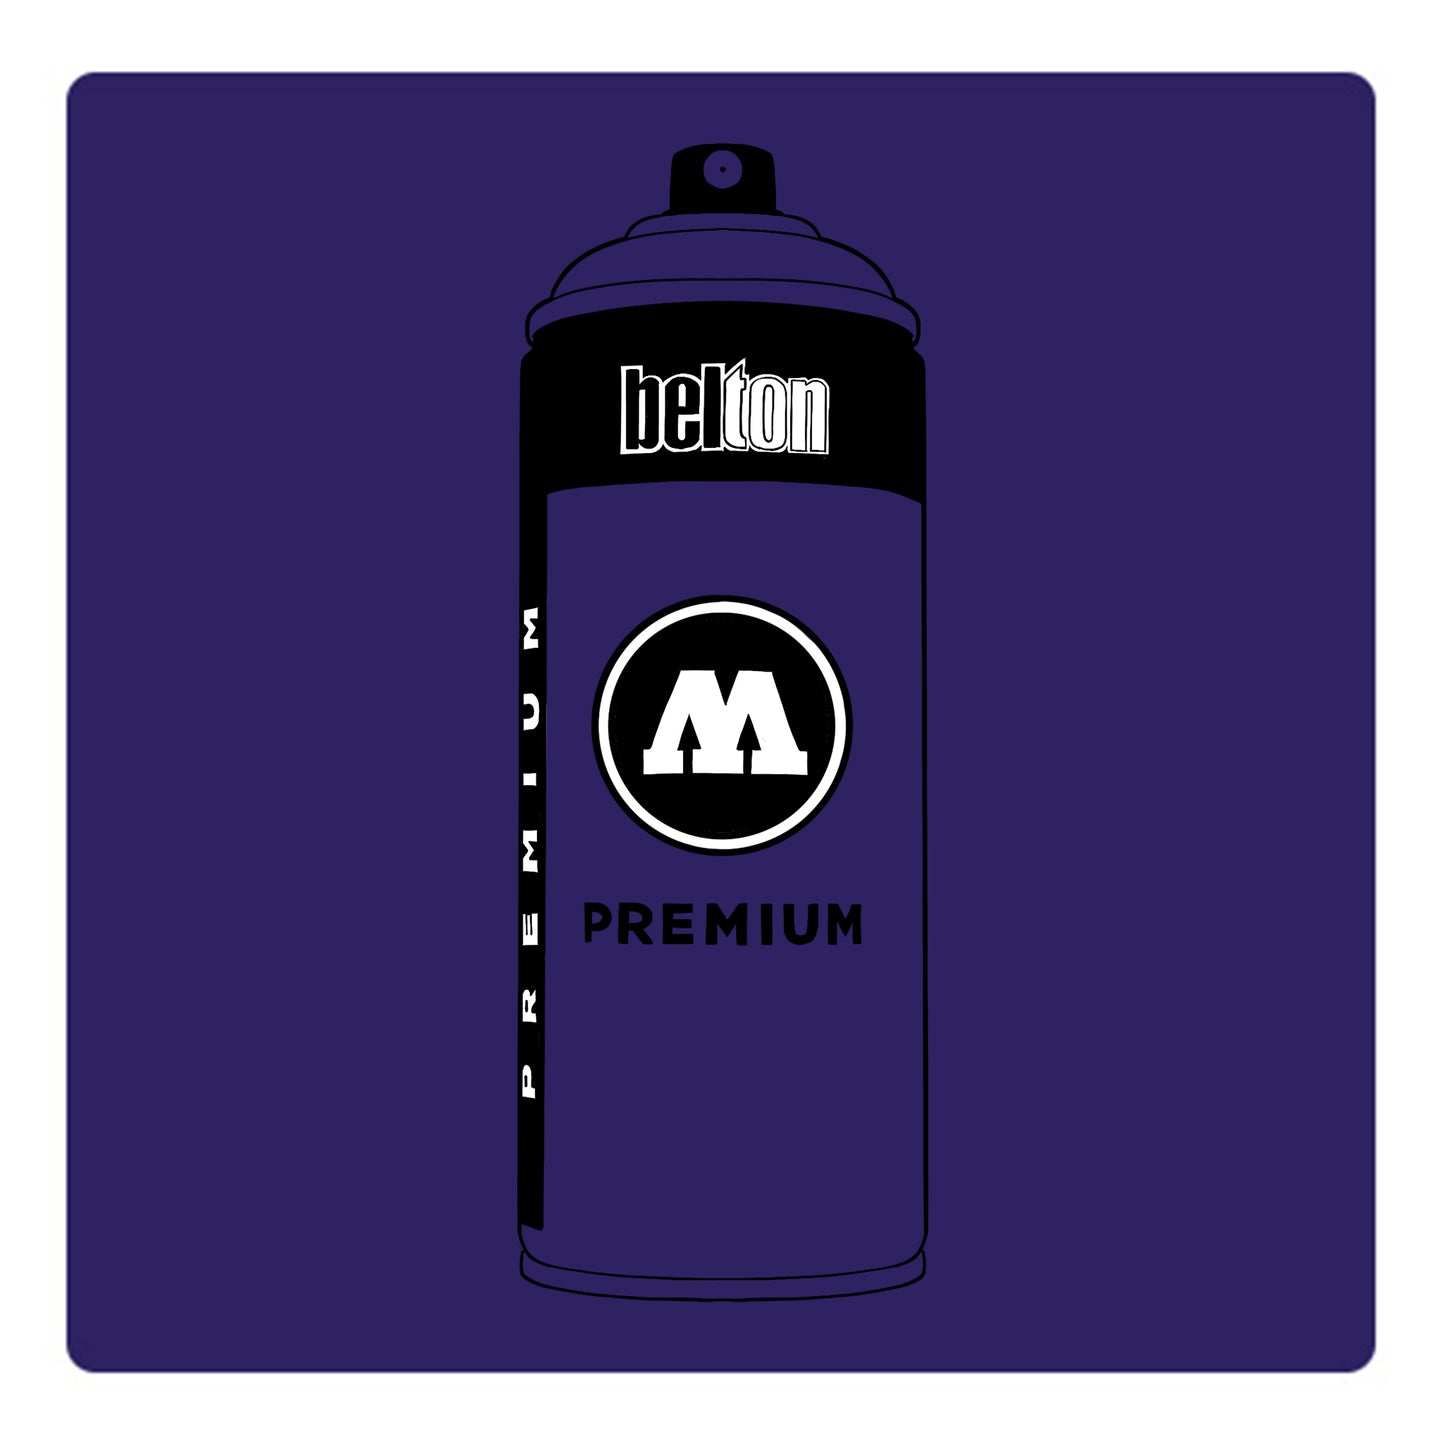 A black outline drawing of a grape purple spray paint can with the words "belton","premium" and the letter"M" written on the face in black and white font. The background is a color swatch of the same grape purple with a white border.